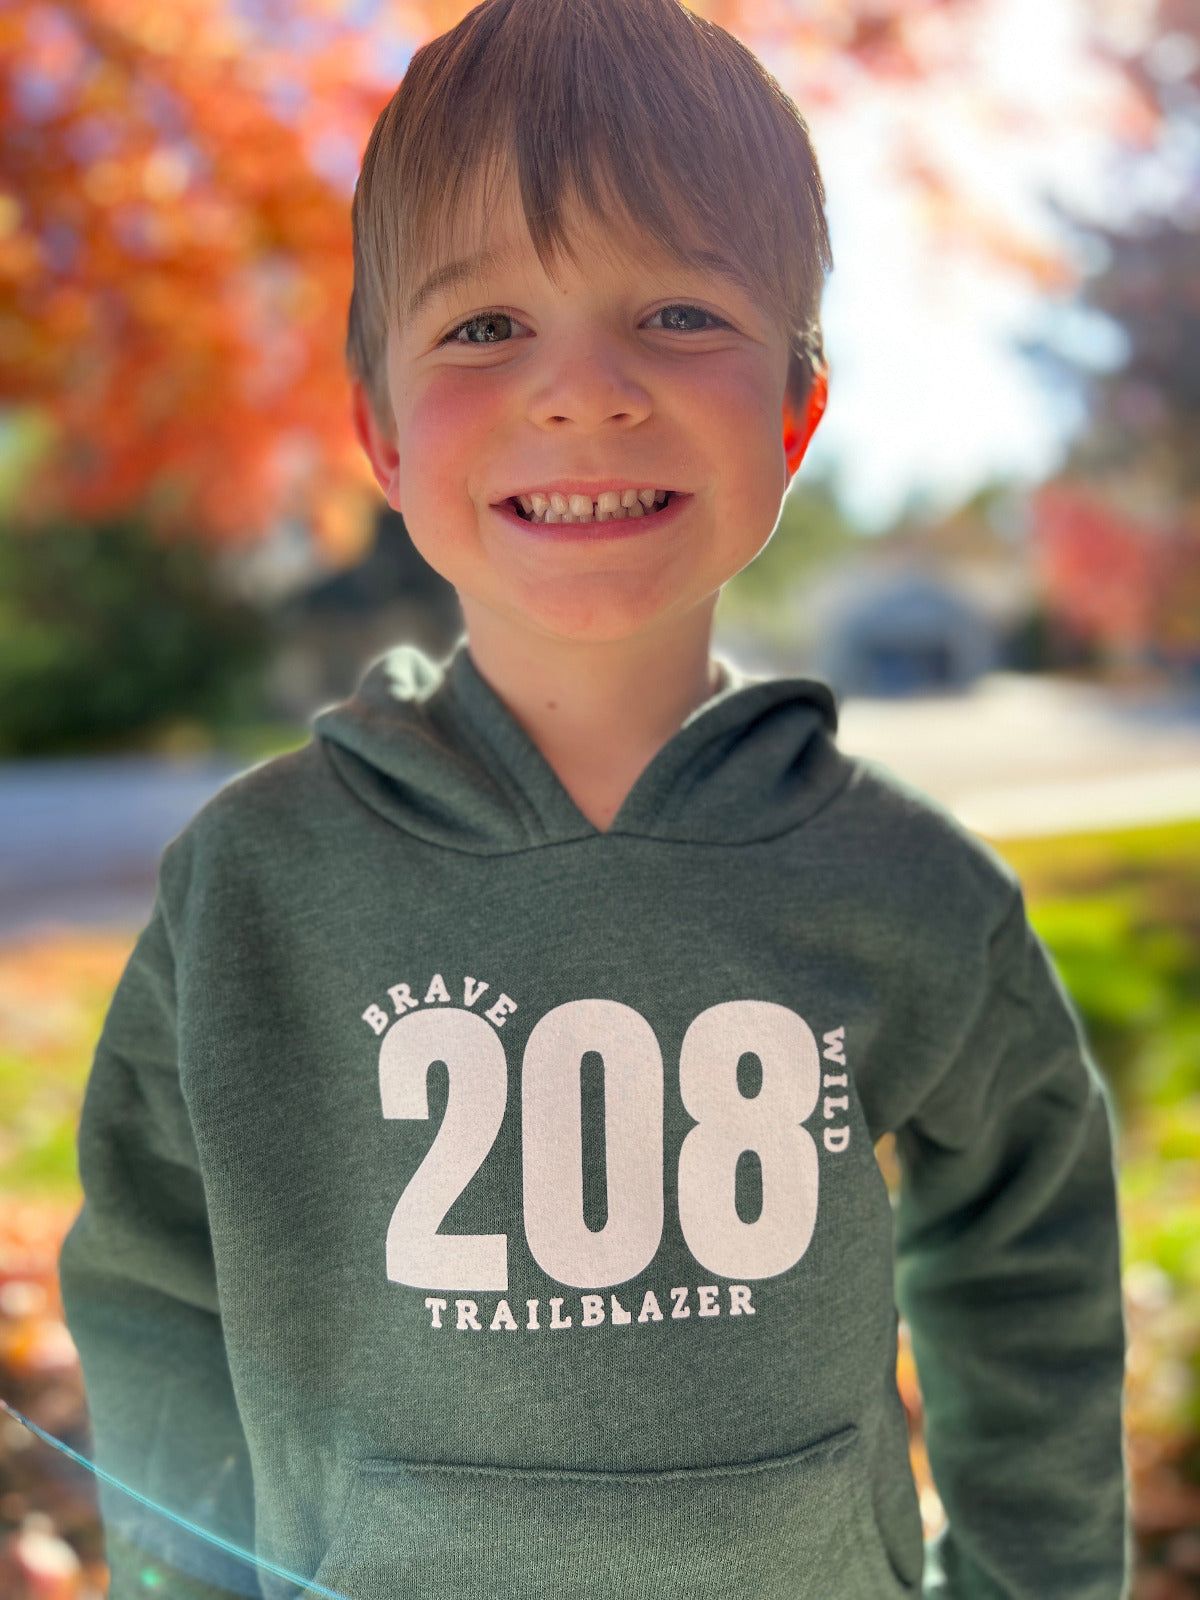 The Dark green forest hoodie is cozy and comfy. Idaho apparel is made for Idaho Kids. TatorJo is made for Idaho Kids. Idaho clothing states 208 on the front. This stands for Idaho. The love for Idaho.